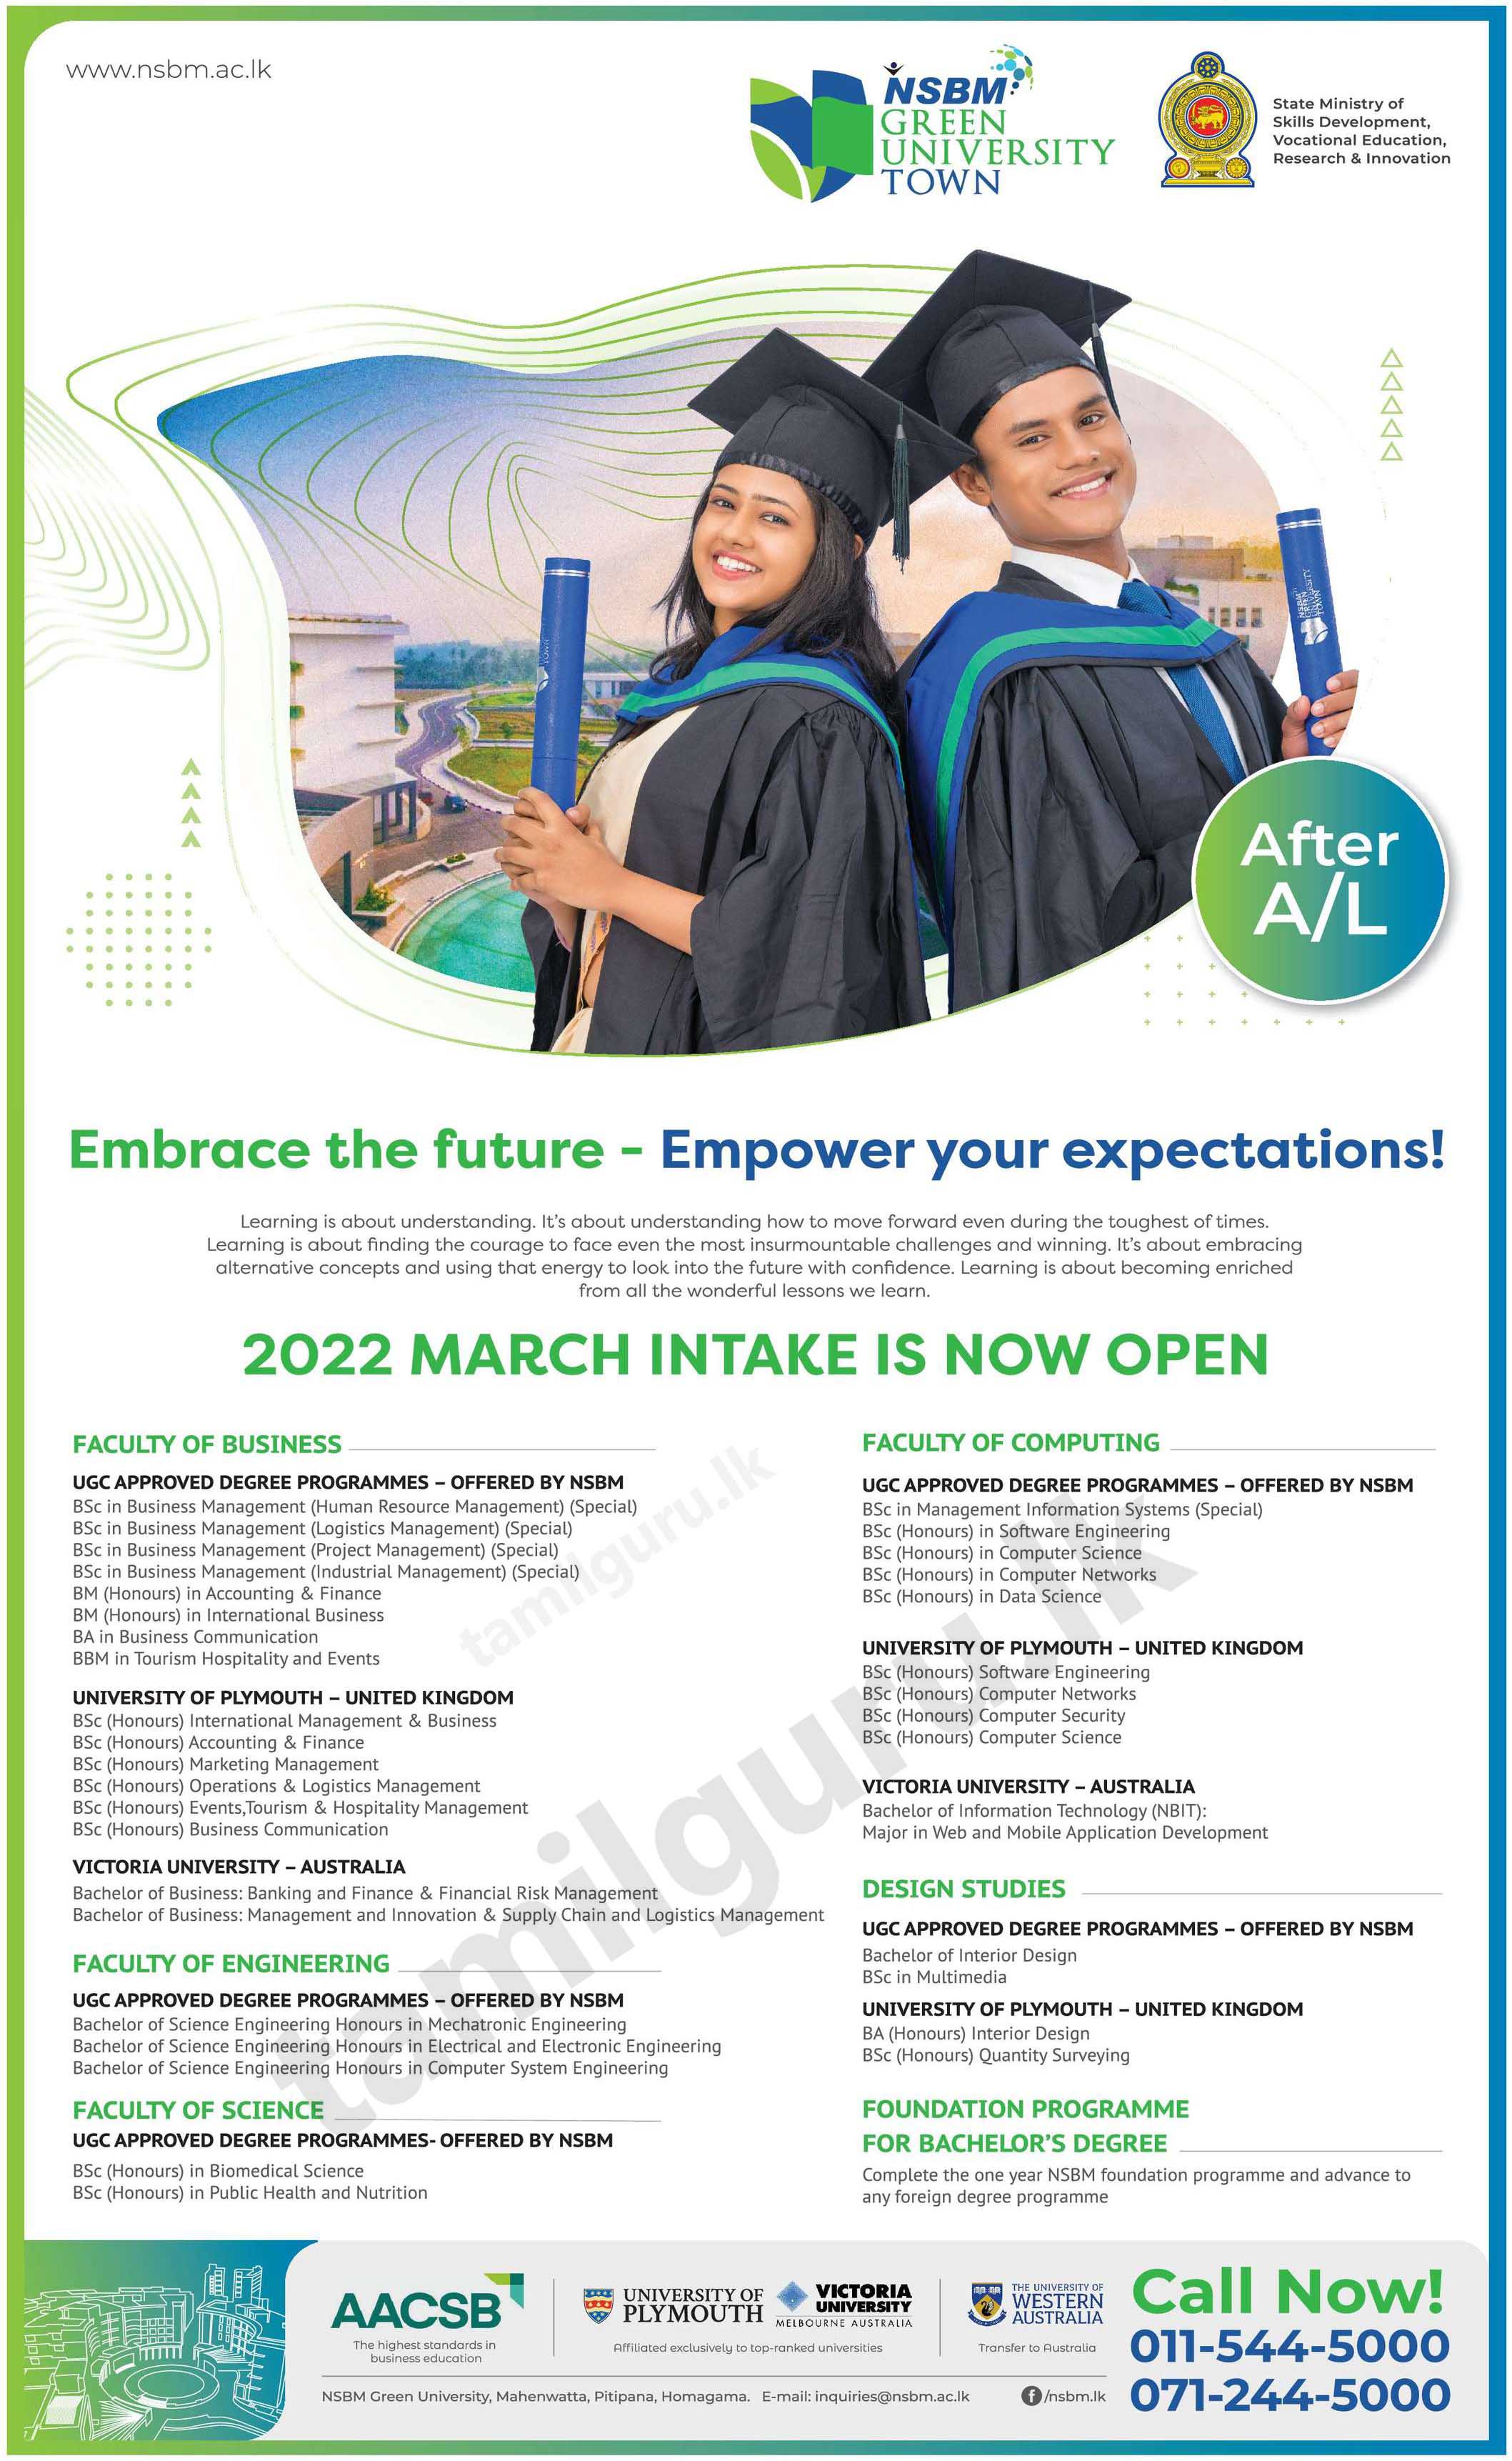 Admission for Degree Programmes (2022 March Intake) - NSBM Green University (National School of Business Management)